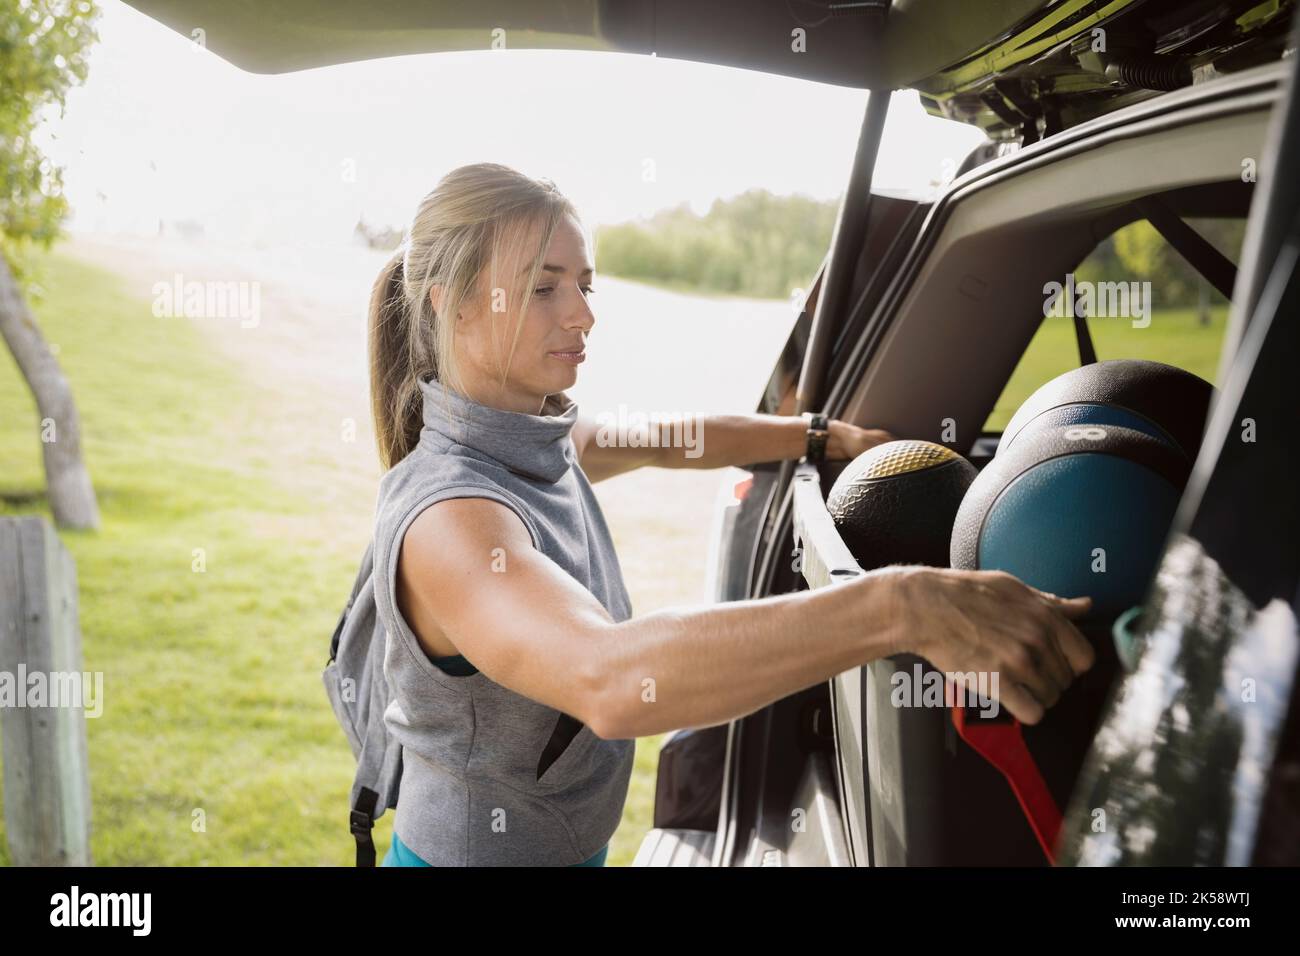 Personal trainer taking sports equipment out of car before bootcamp Stock Photo